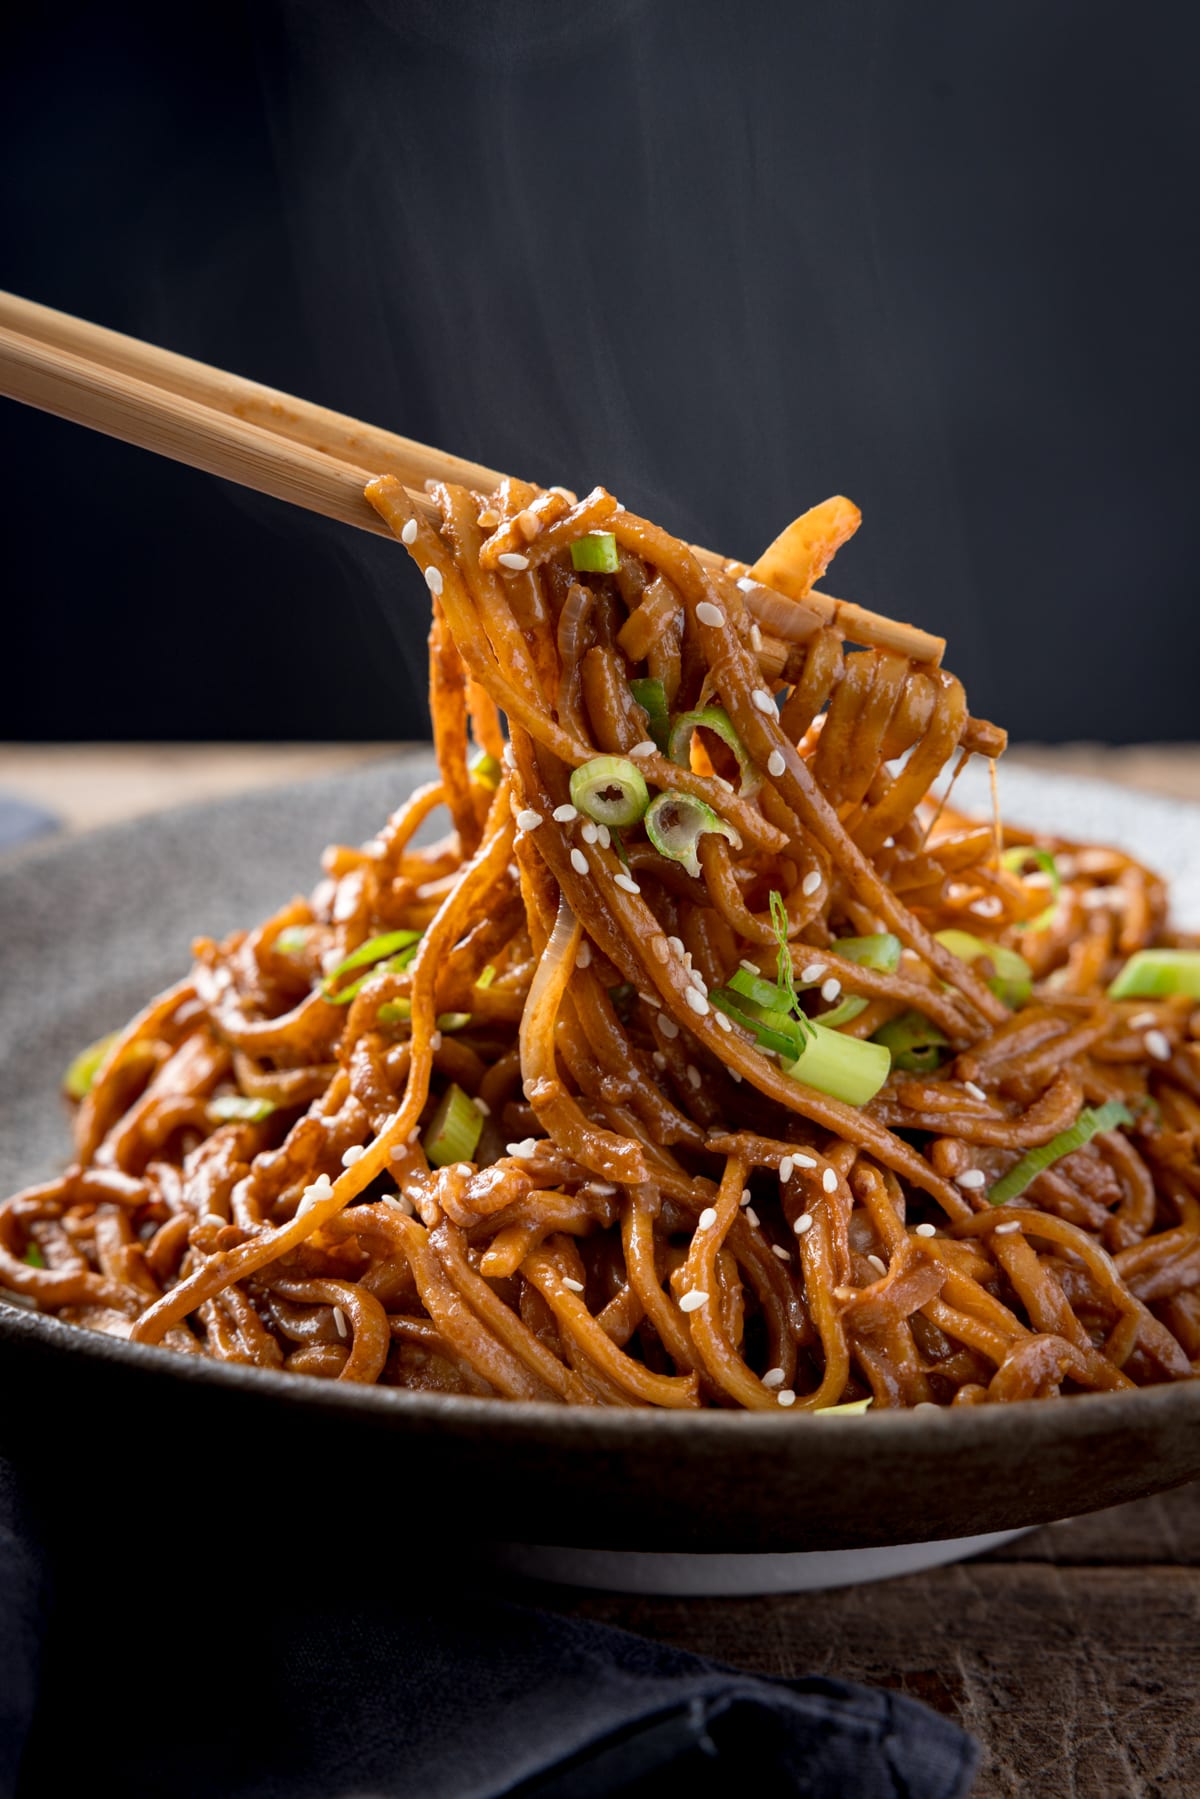 Tall image of sesame noodles in a bowl, topped with spring onions and sesame seeds against a dark background, on top of a wooden surface. The noodles are being lifted with a pair of wooden chopsticks.